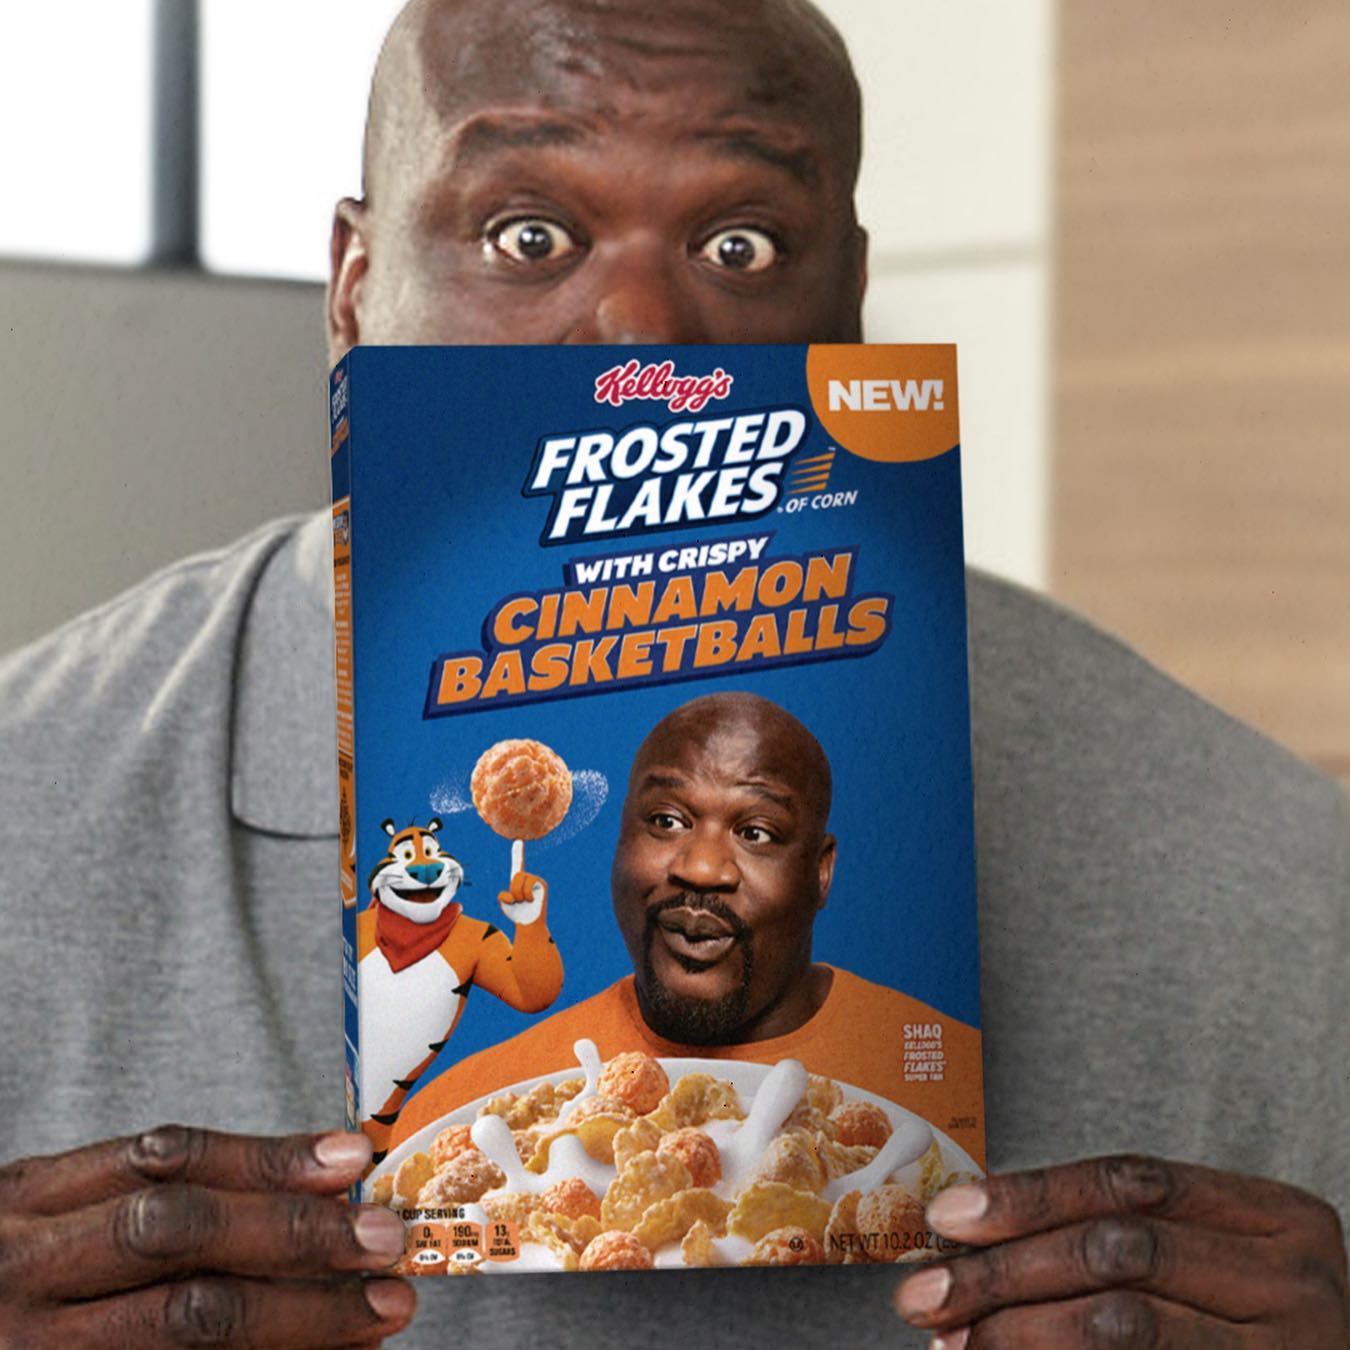 Shaquille O'Neal holding a box of Kellogg’s Frosted Flakes with Crispy Cinnamon Basketballs